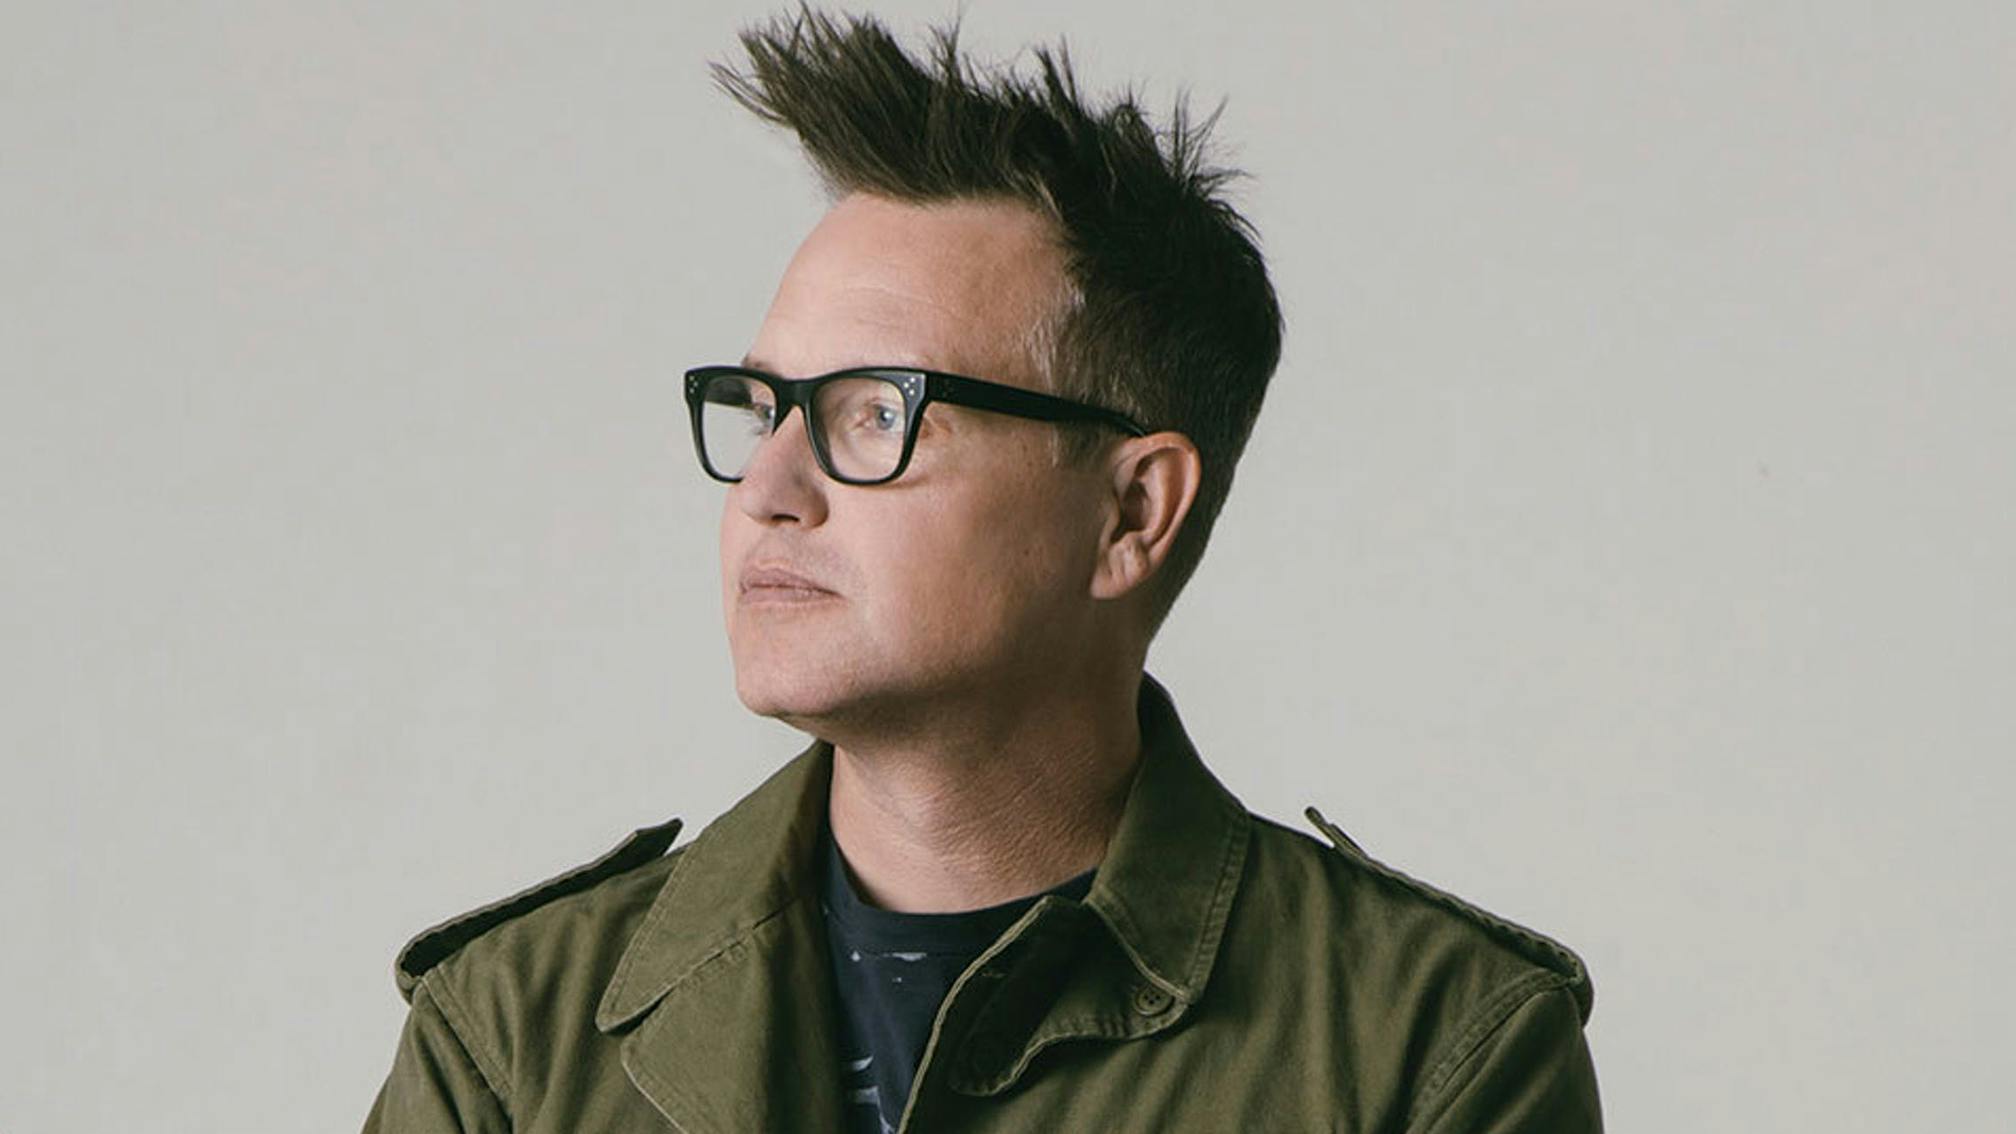 blink-182's Mark Hoppus says he is now "cancer free"